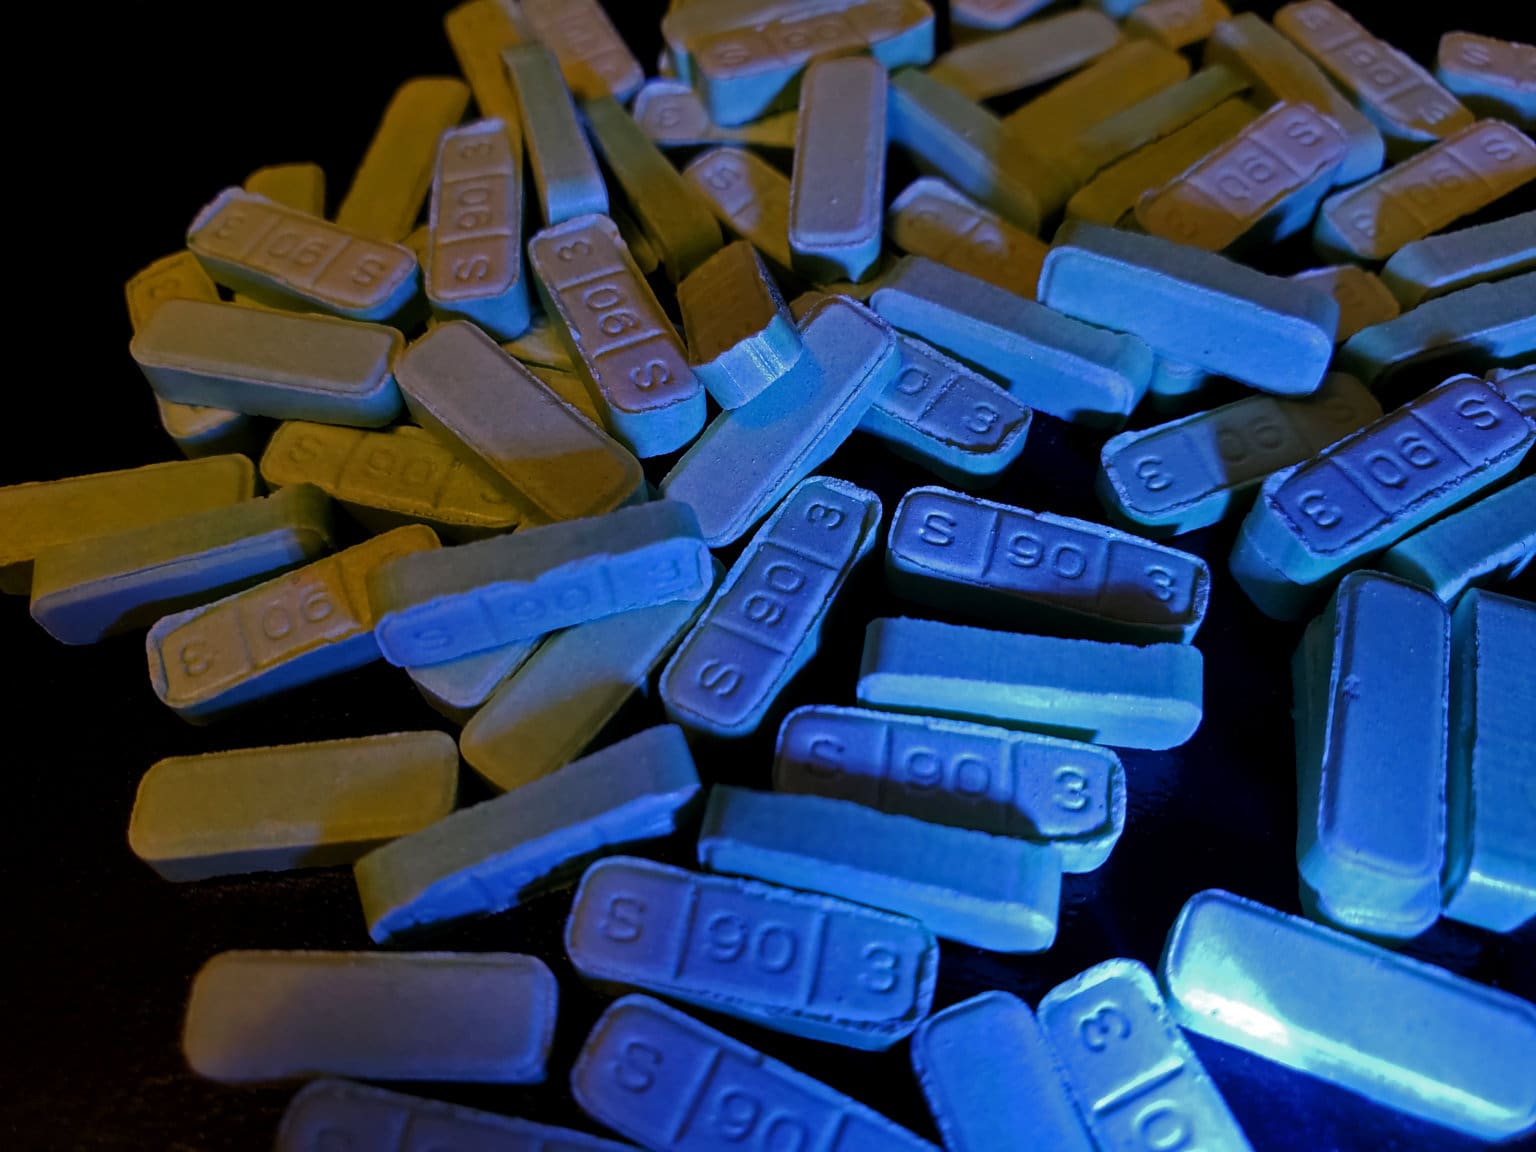 Types of Xanax, Their Colors & Their Dangers | Prosperity Haven